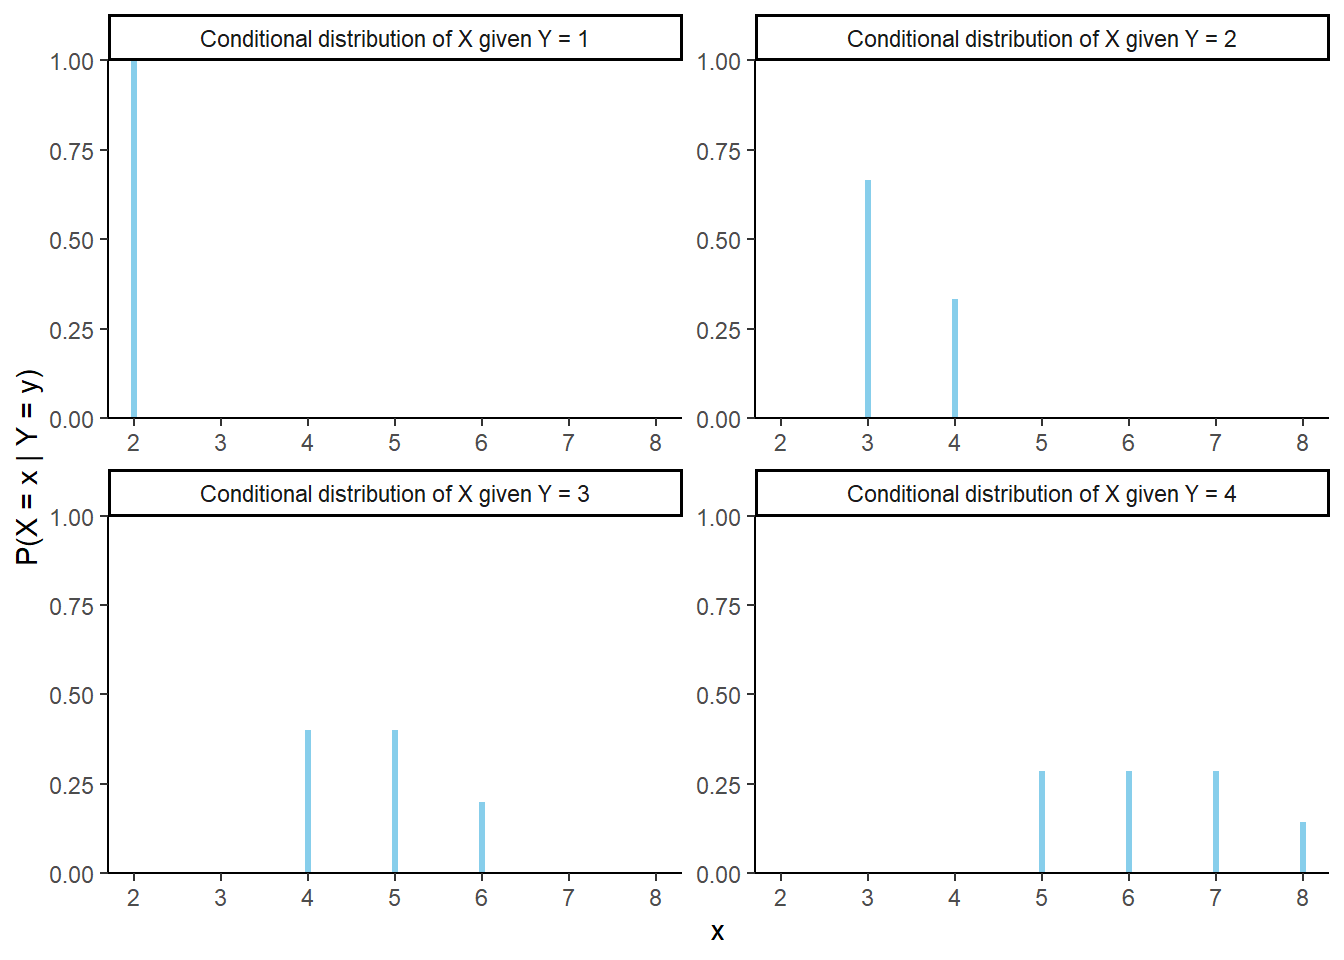 Impulse plots representing the family of conditional distributions of \(X\) given \(Y\). Each plot represents a conditional distribution of \(X\) given \(Y=y\) for a particular value of \(y= 1, 2, 3, 4\).